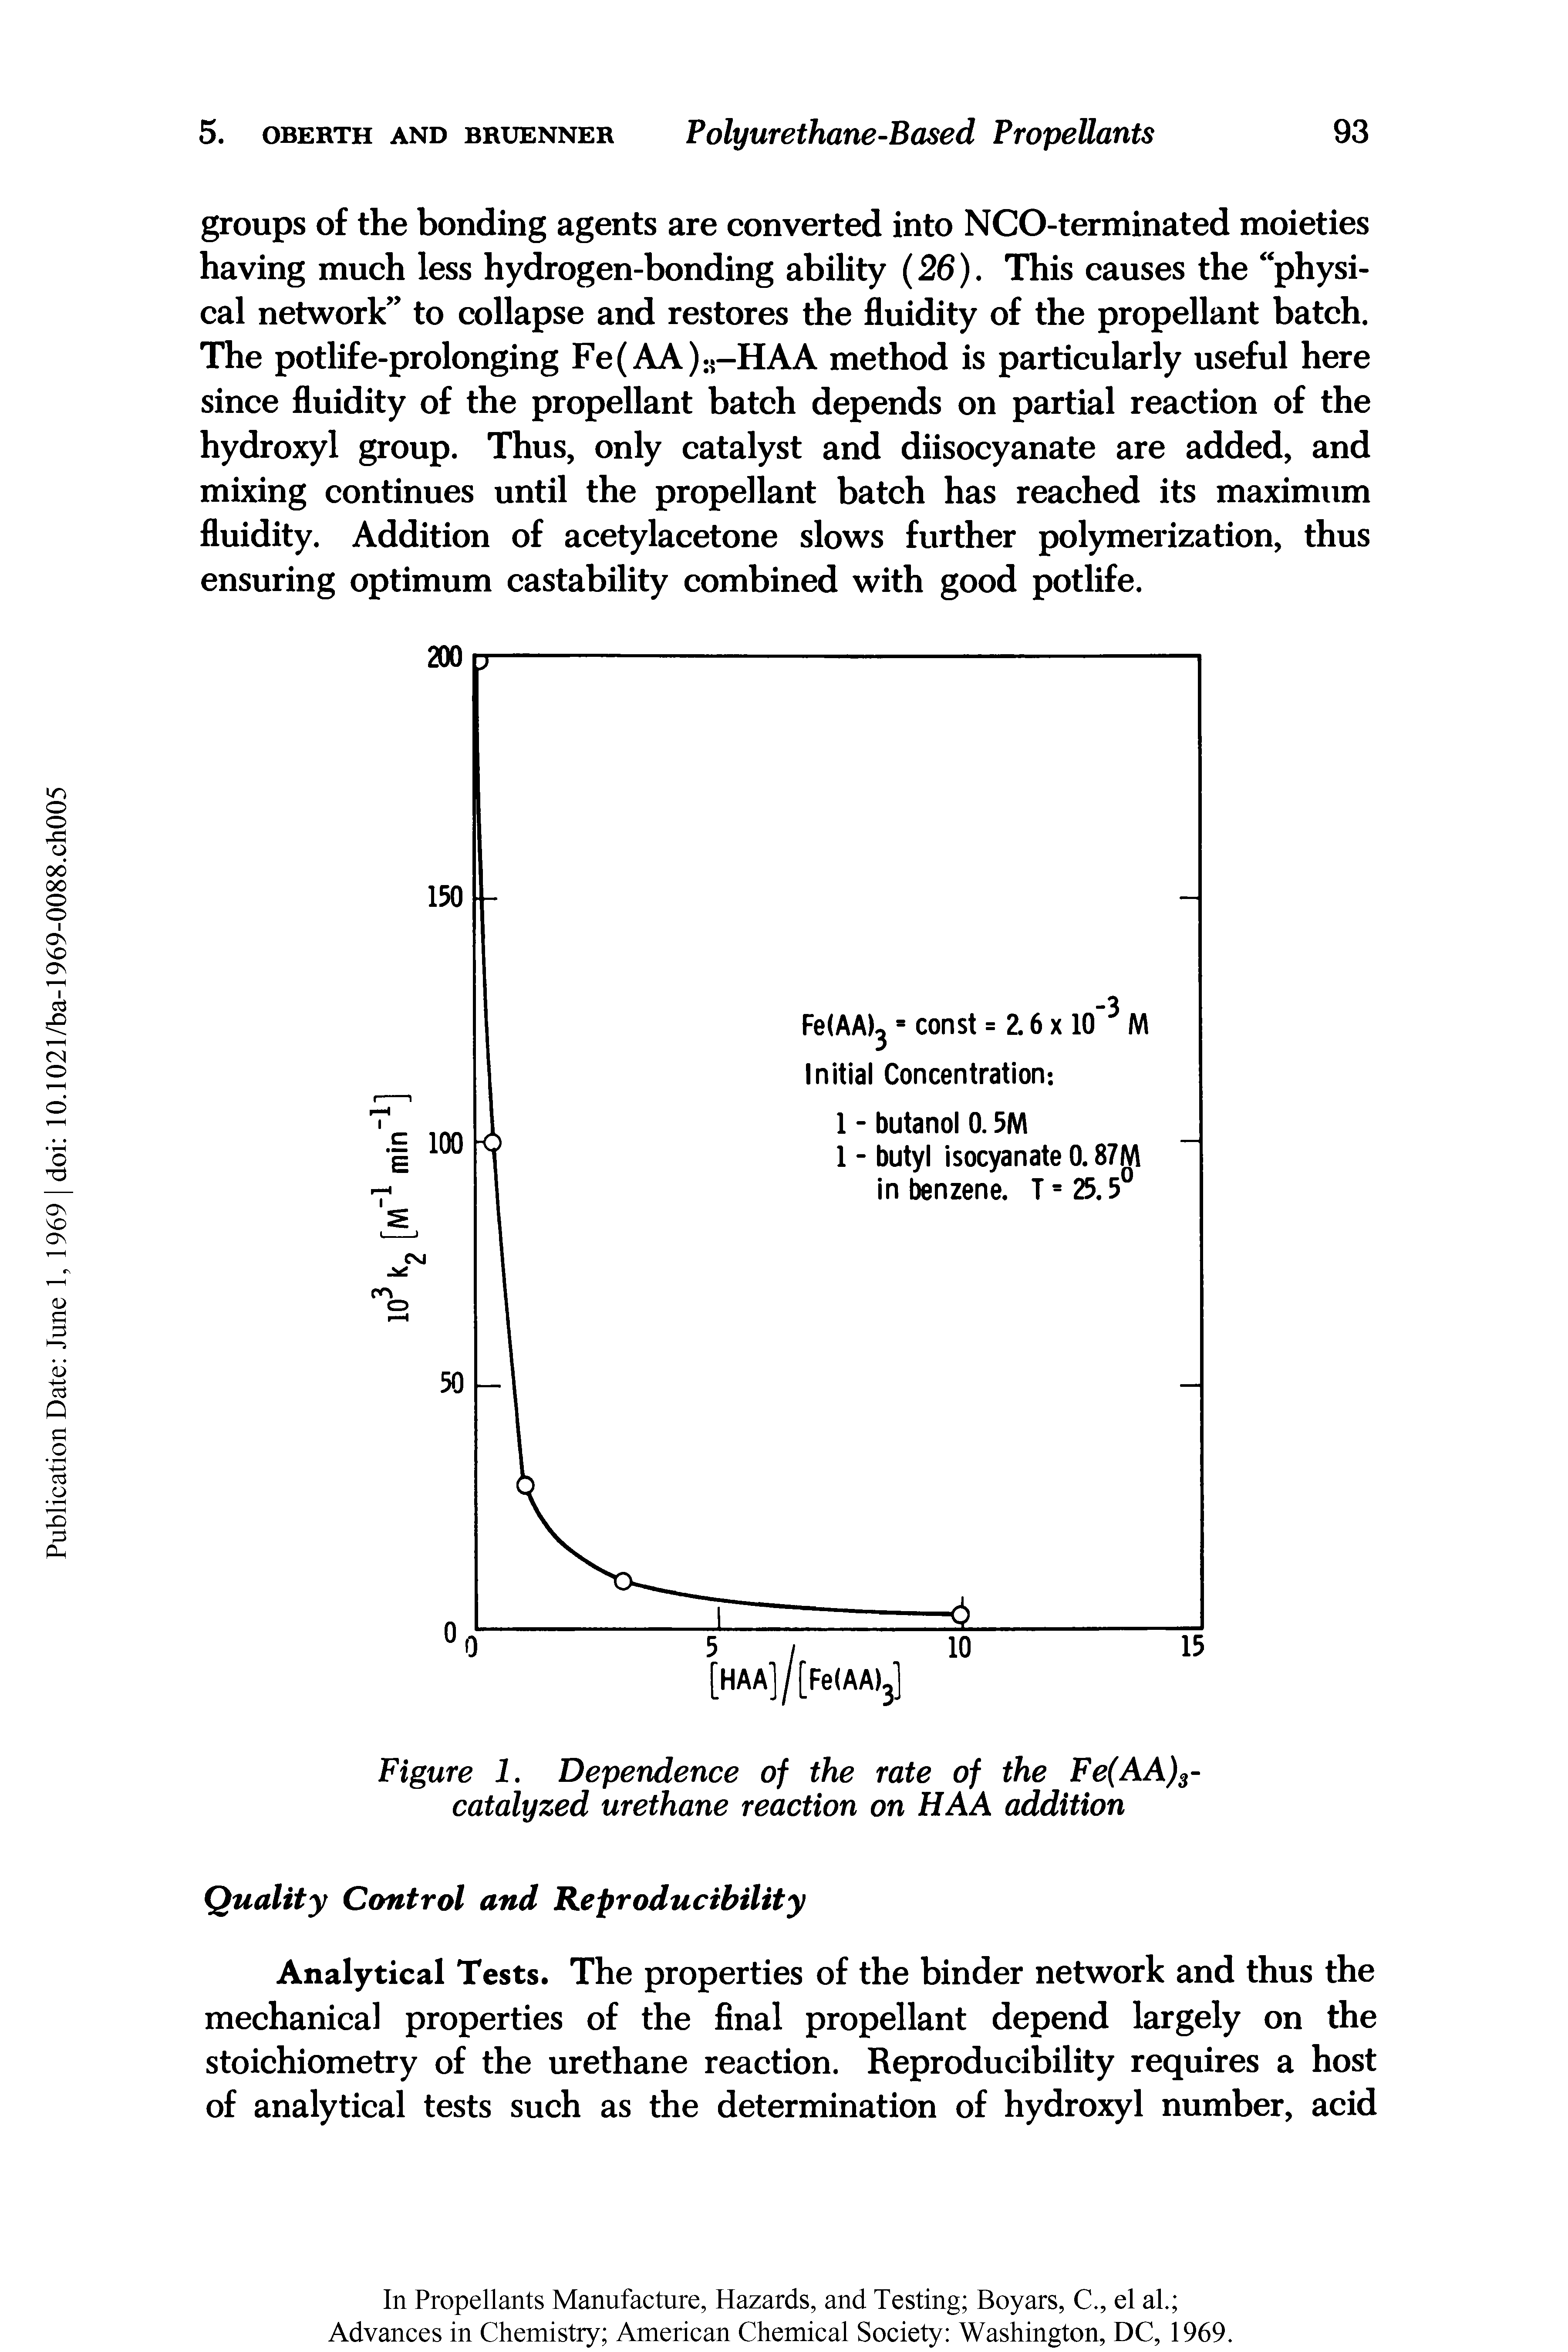 Figure 1. Dependence of the rate of the Fe(AA)3-catalyzed urethane reaction on HAA addition...